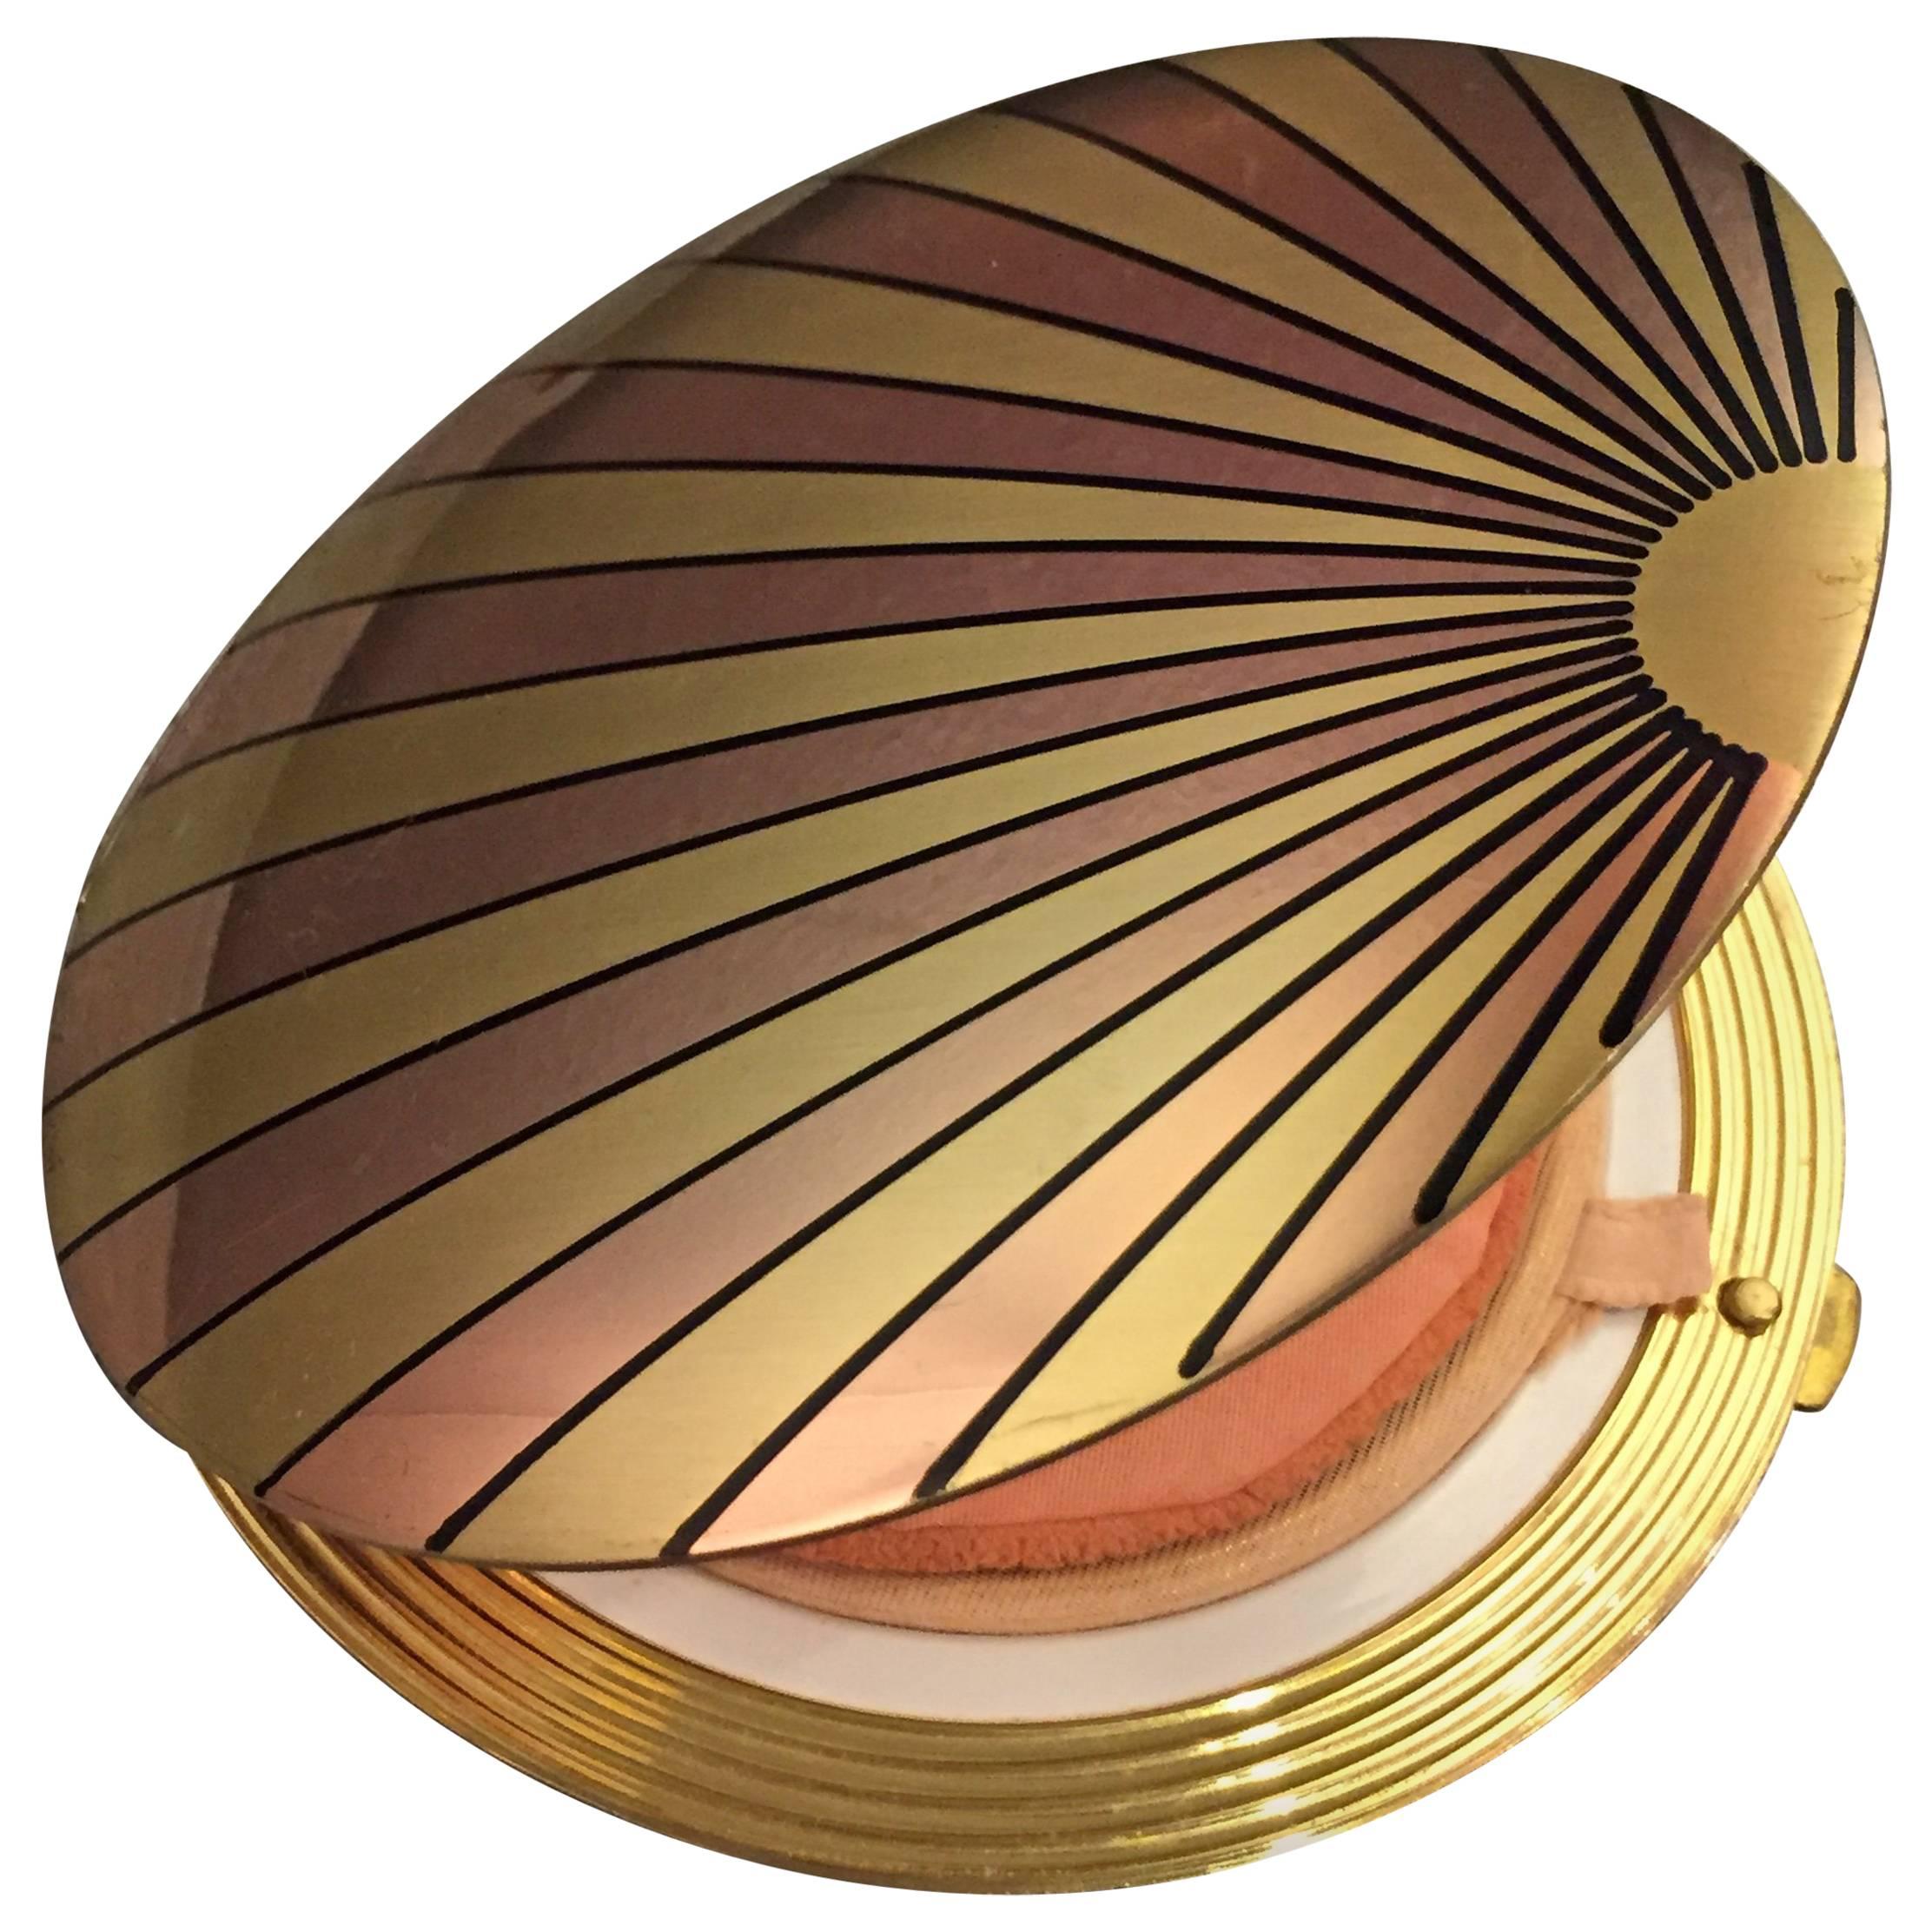 1940's Art Deco Inspired Rose Gold & Brass Sun Ray Motif Compact 